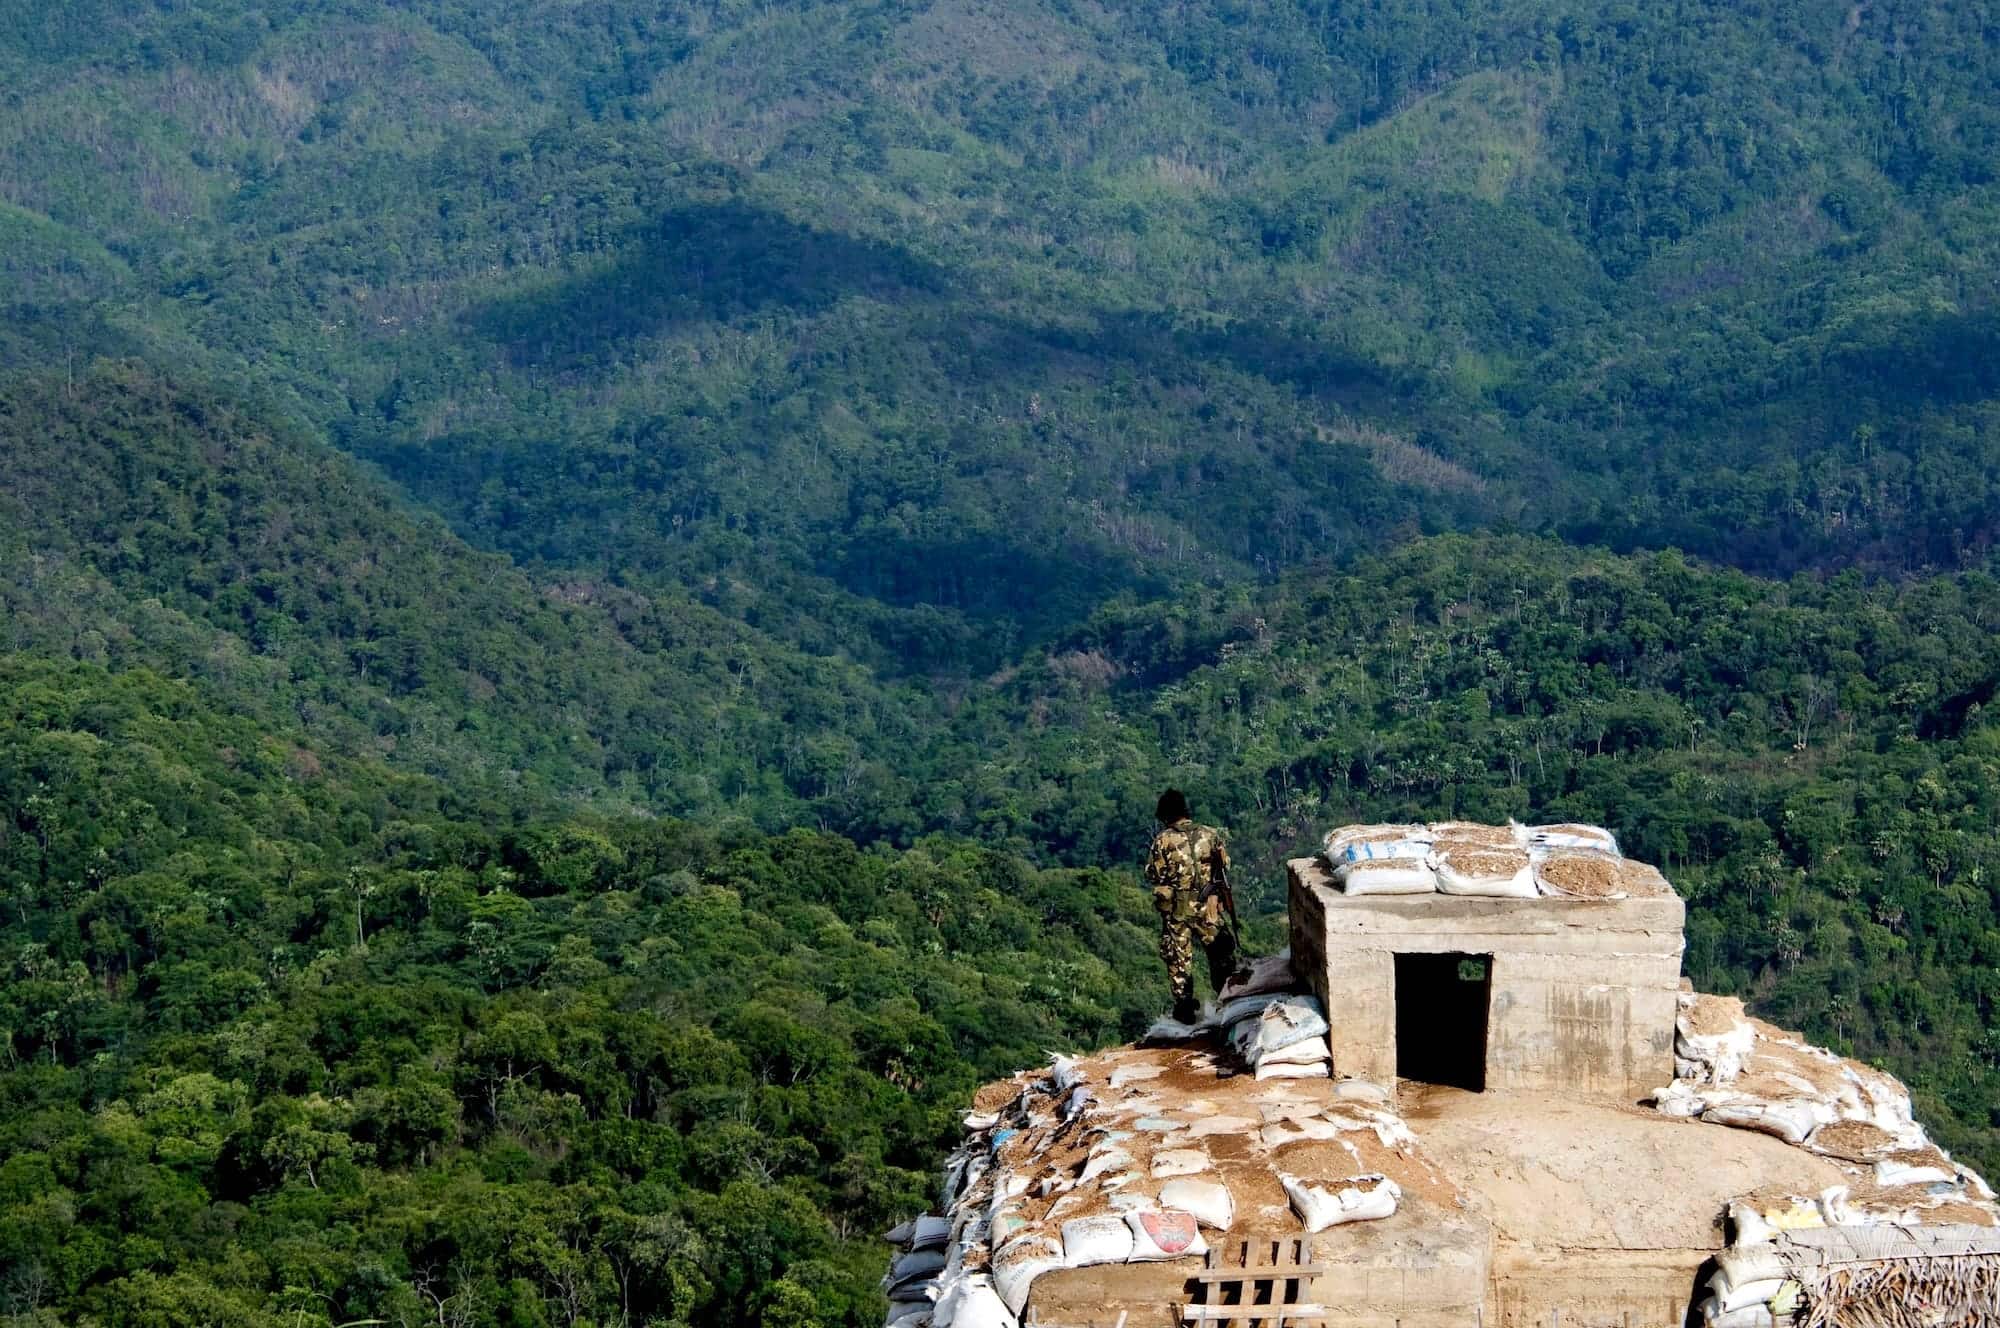 A soldier of the Shan State Army – South, the armed wing of the Restoration Council of Shan State, stands atop a sentry post in the Shan Hills in 2010 (Thierry Falise via Getty Images)